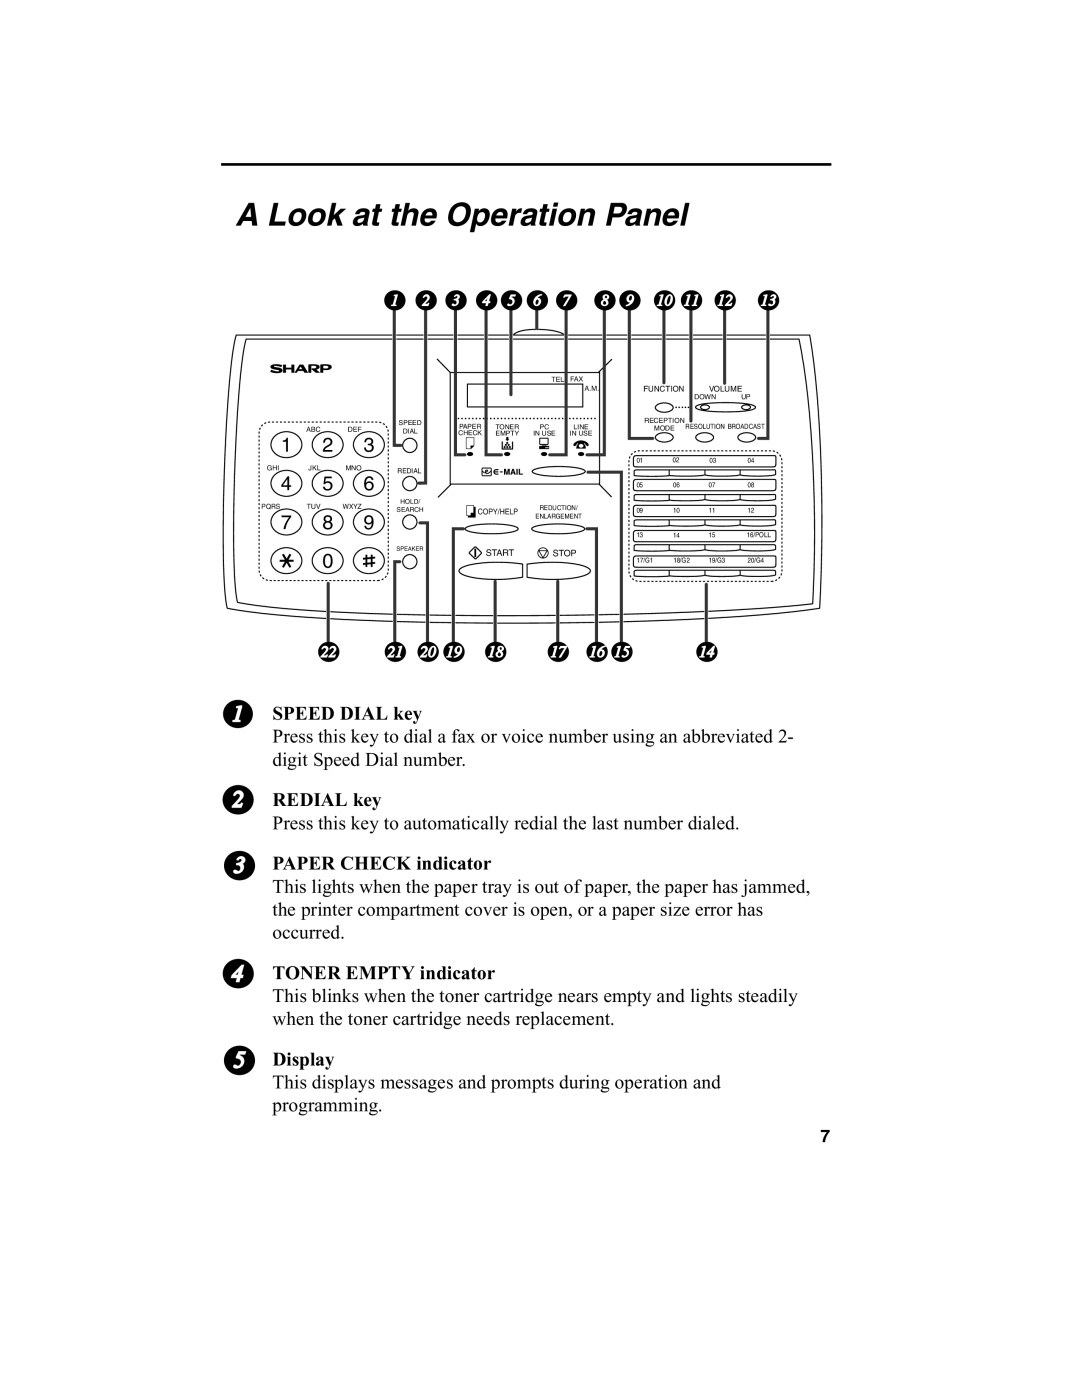 Sharp FO-2970M operation manual Look at the Operation Panel 